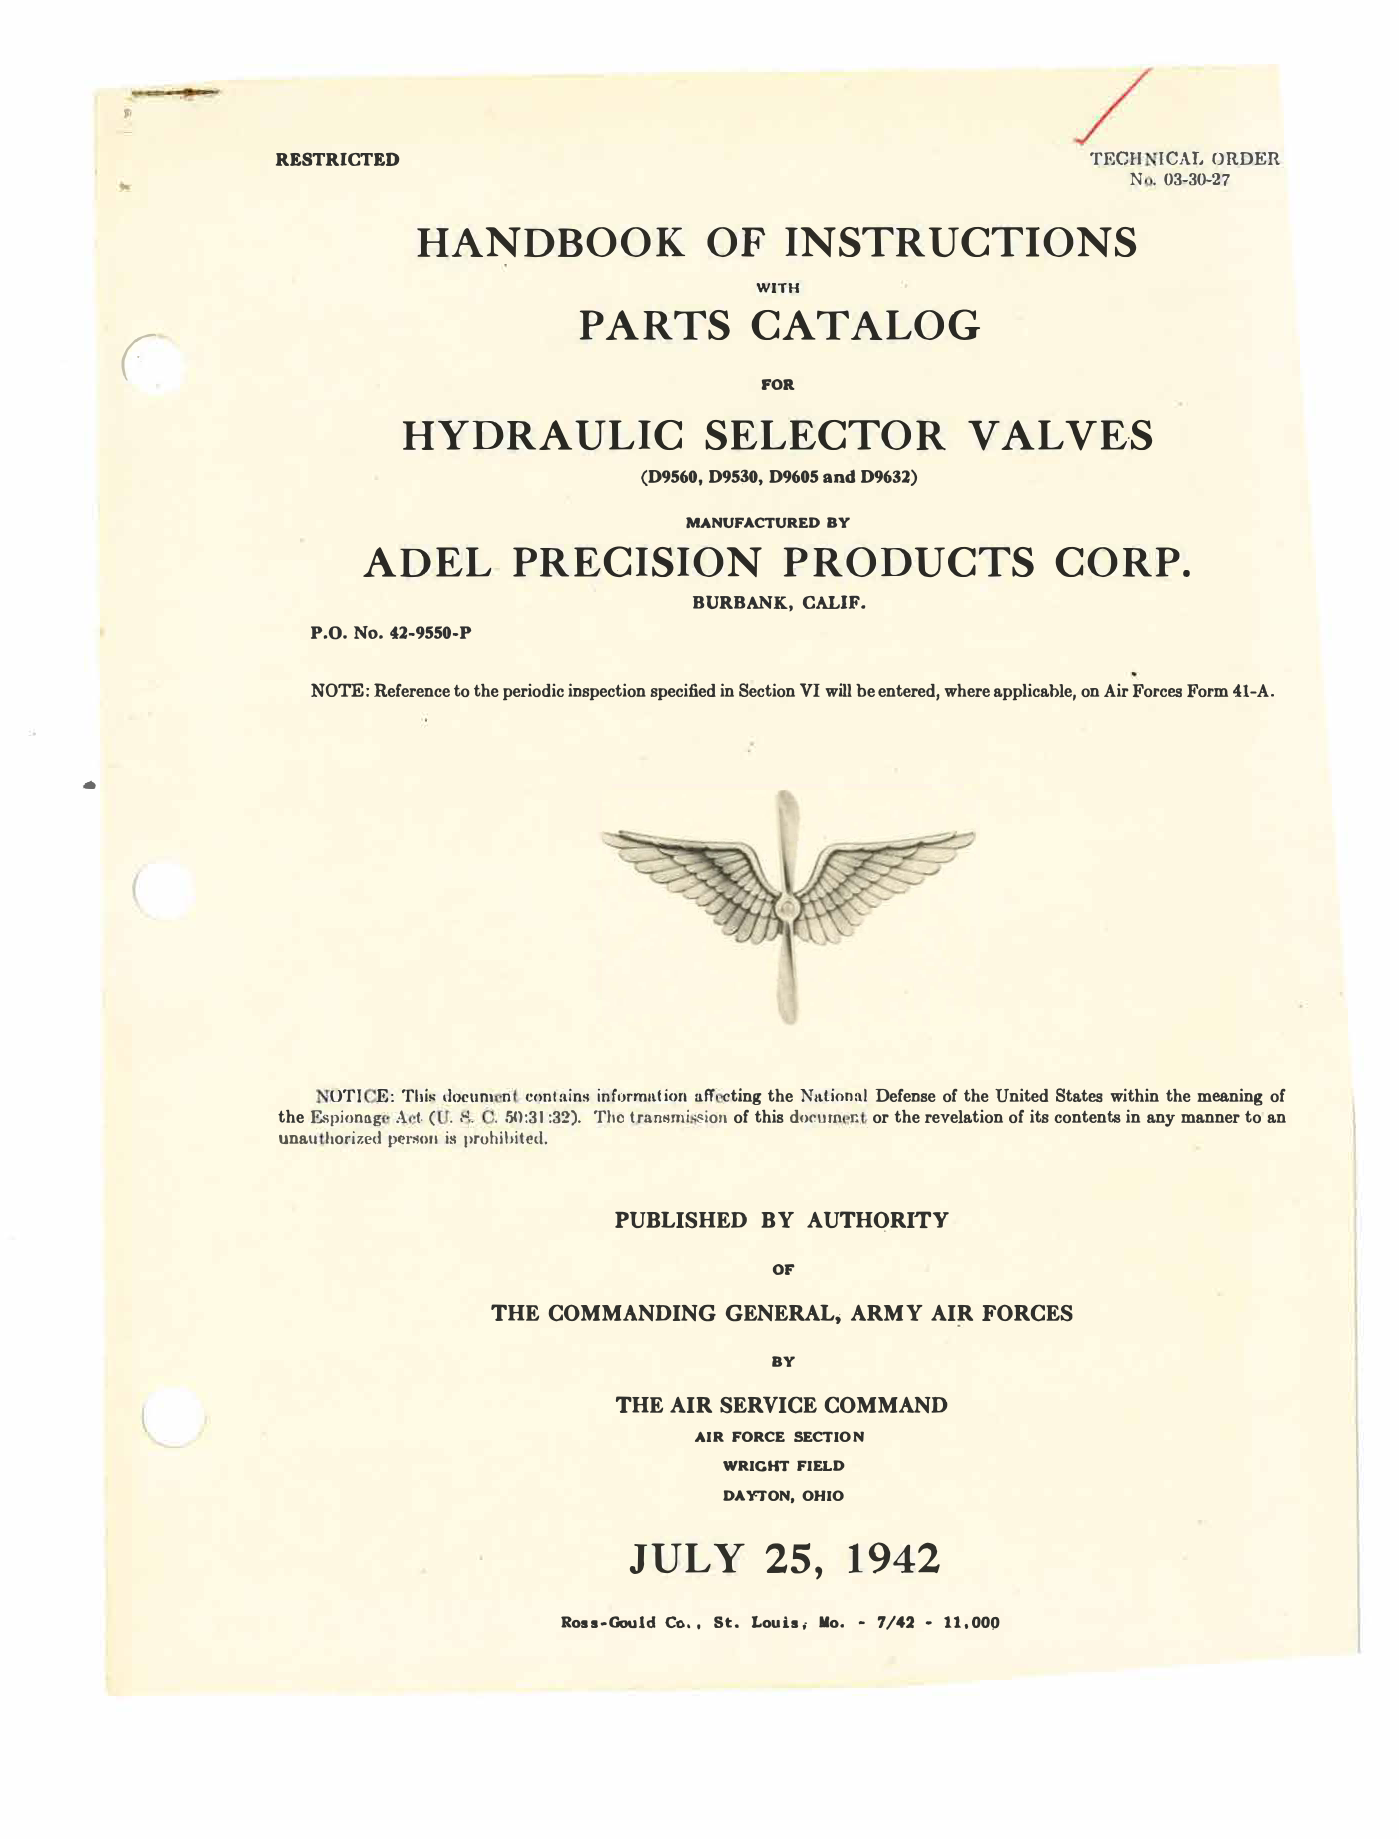 Sample page 1 from AirCorps Library document: Handbook of Instructions with Parts Catalog for Hydraulic Selector Valves